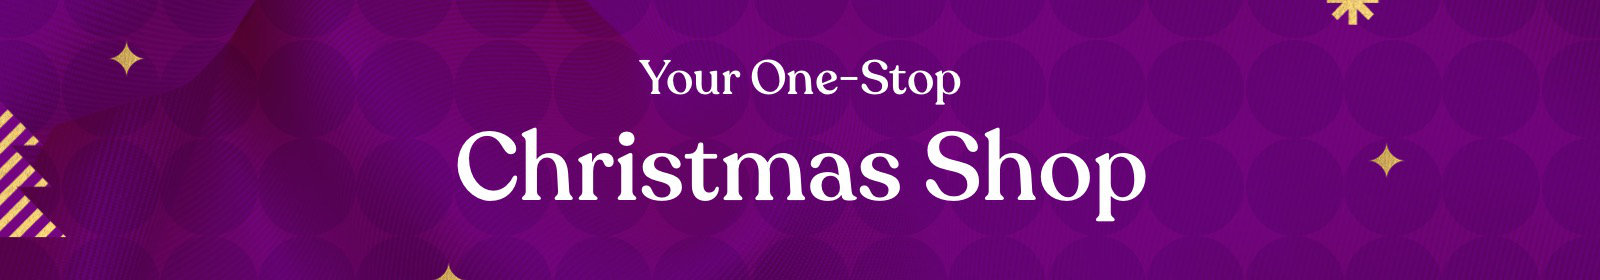 Your One-Stop Christmas Shop